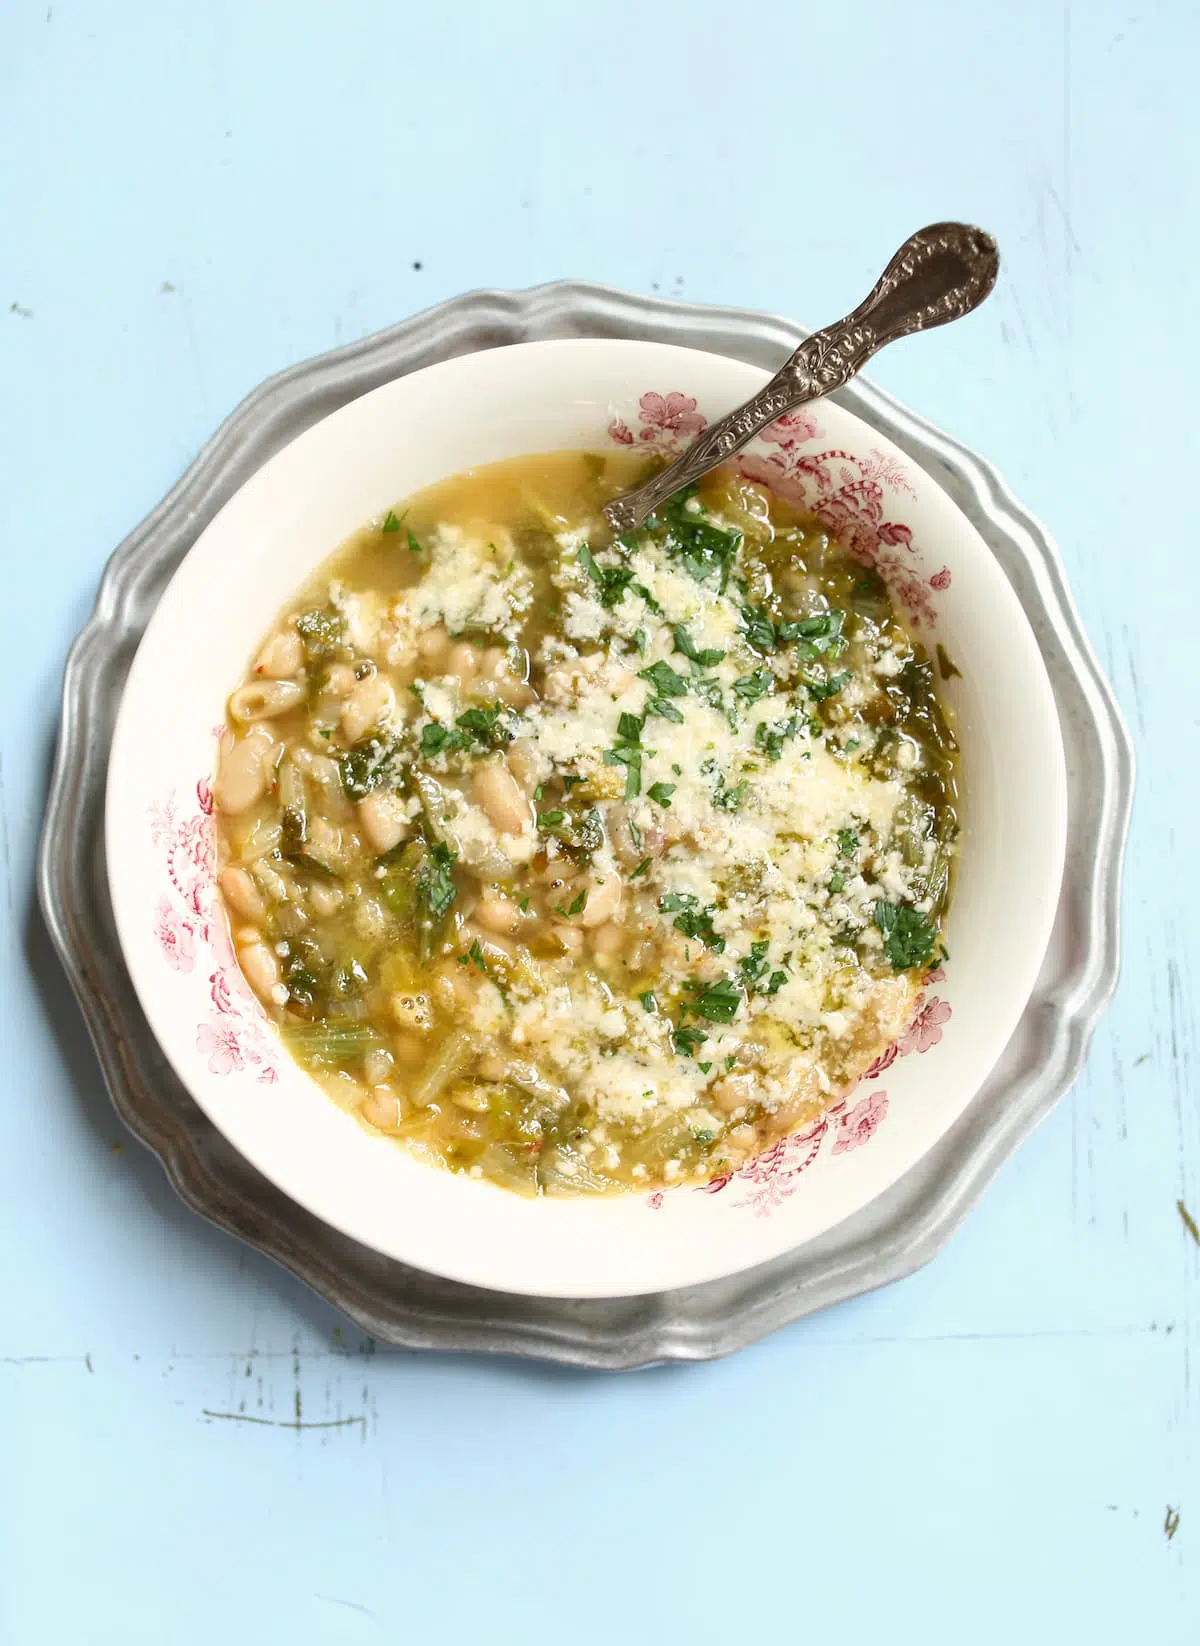 a large bowl of soup of white beans, greens and cheese.